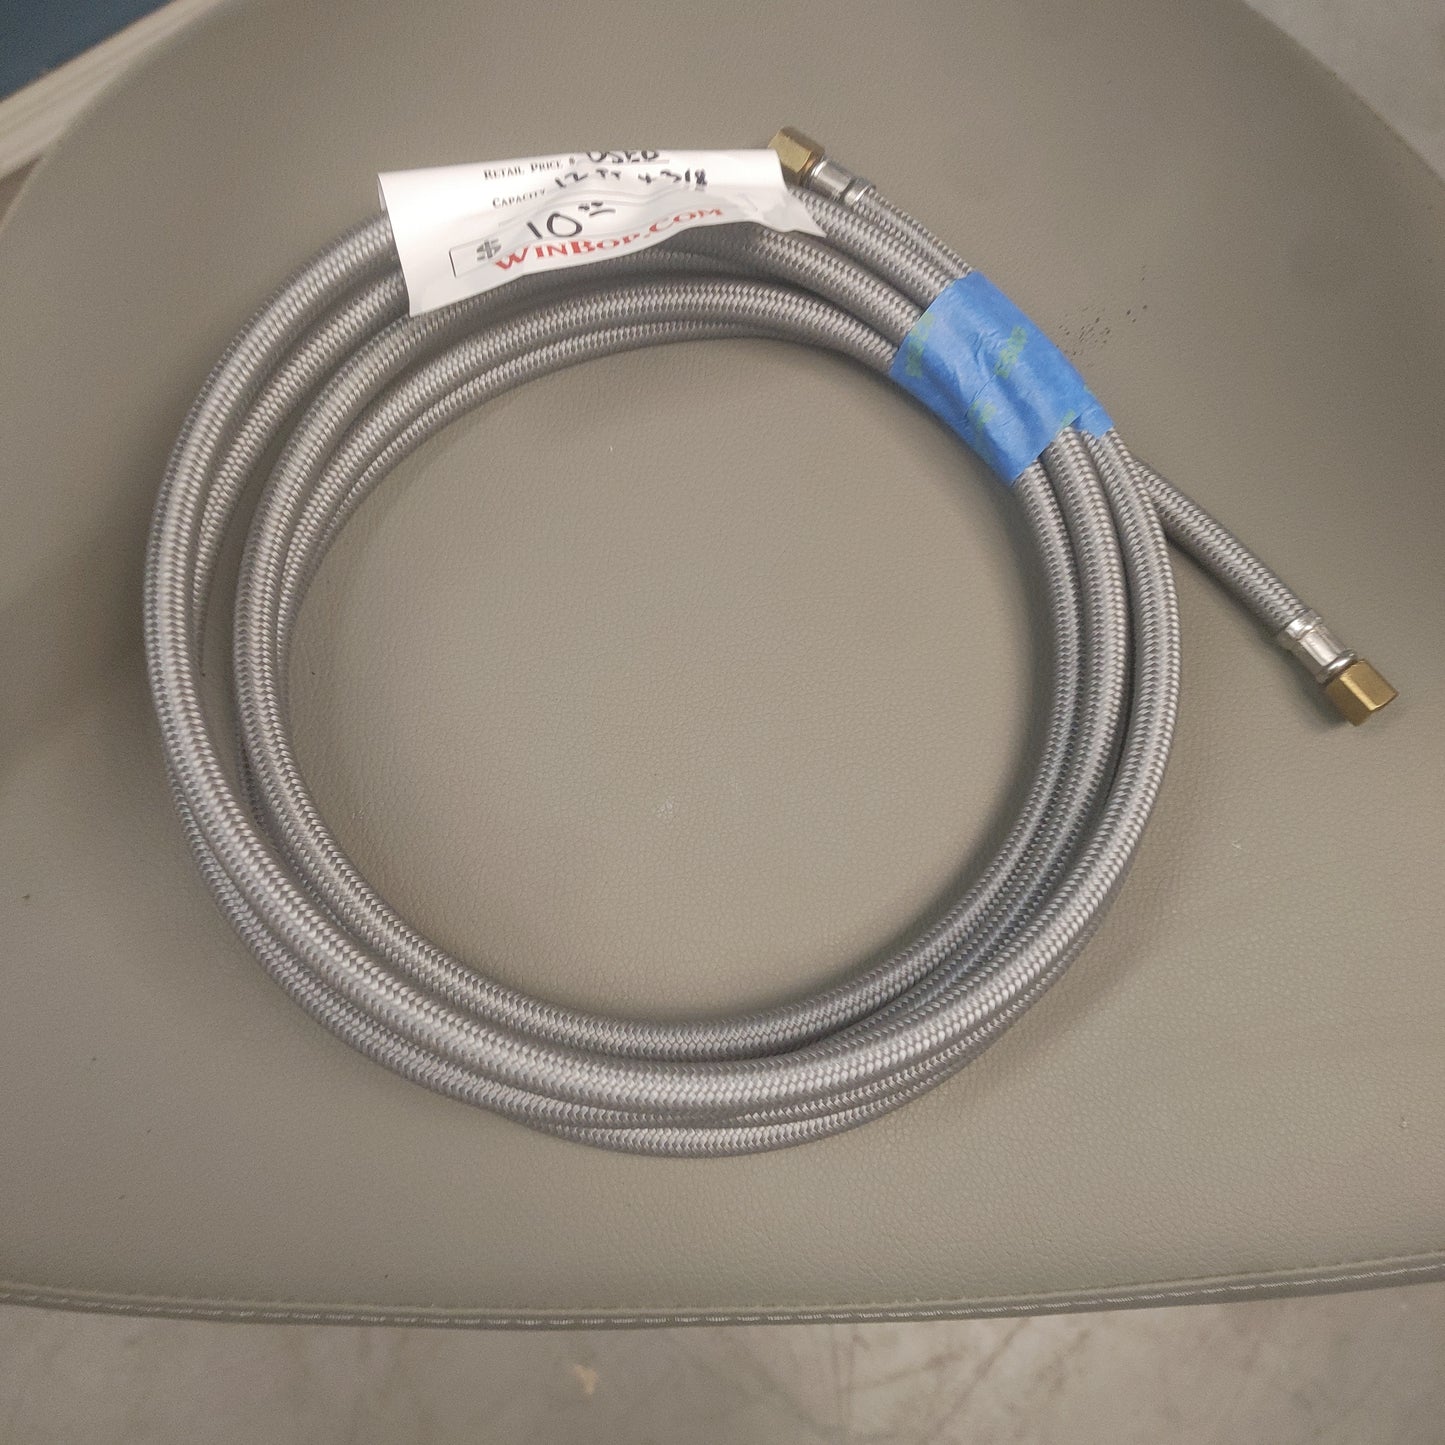 Used 12ft x 3/8 water line for refrigerators